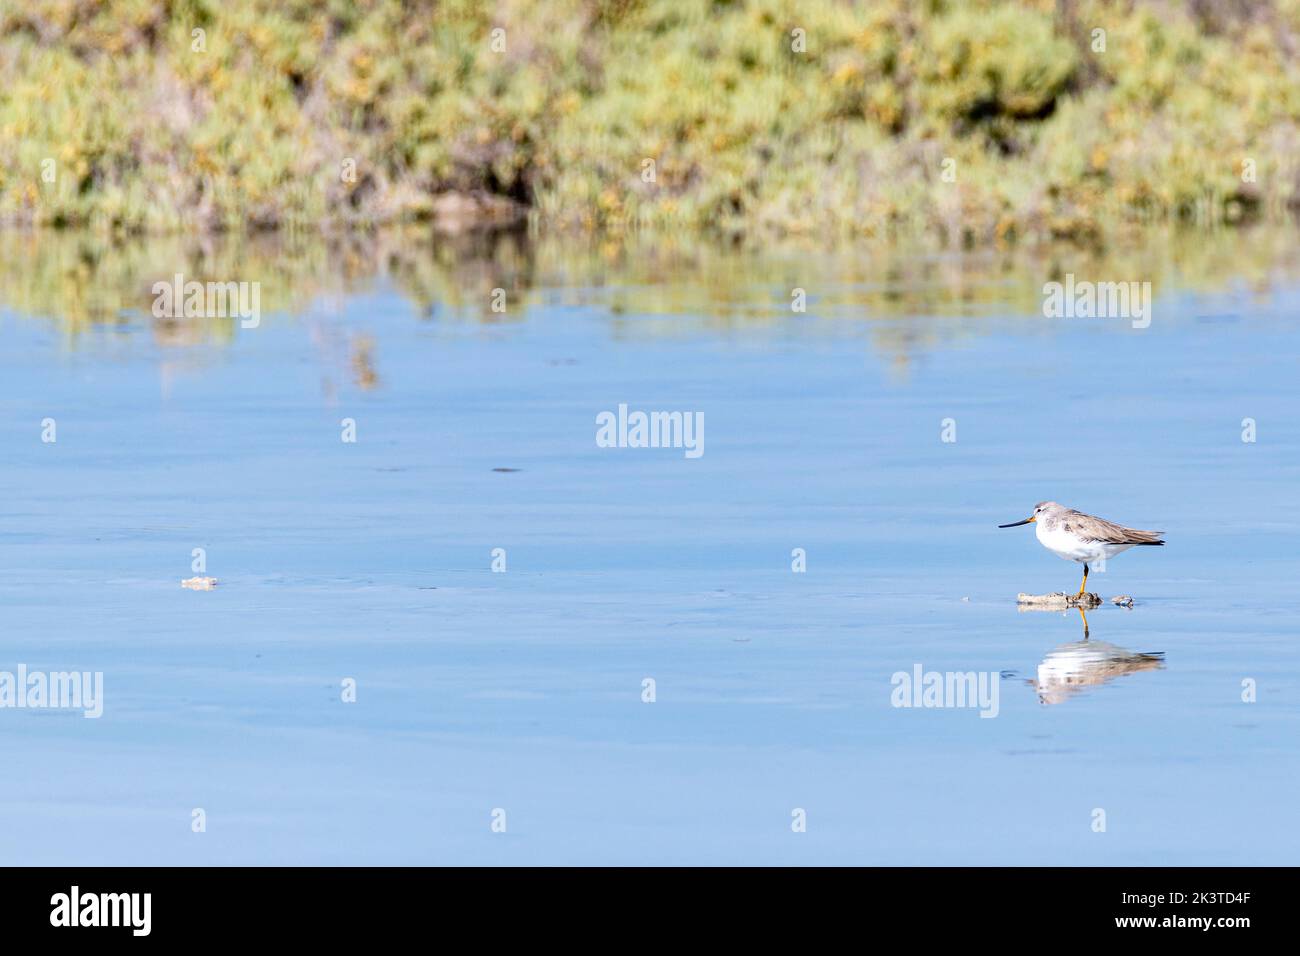 Small bird eating by low tide in a the mangrove of Umm Al Quwain, United Arab Emirates, Middle East, Arabian Peninsula Stock Photo